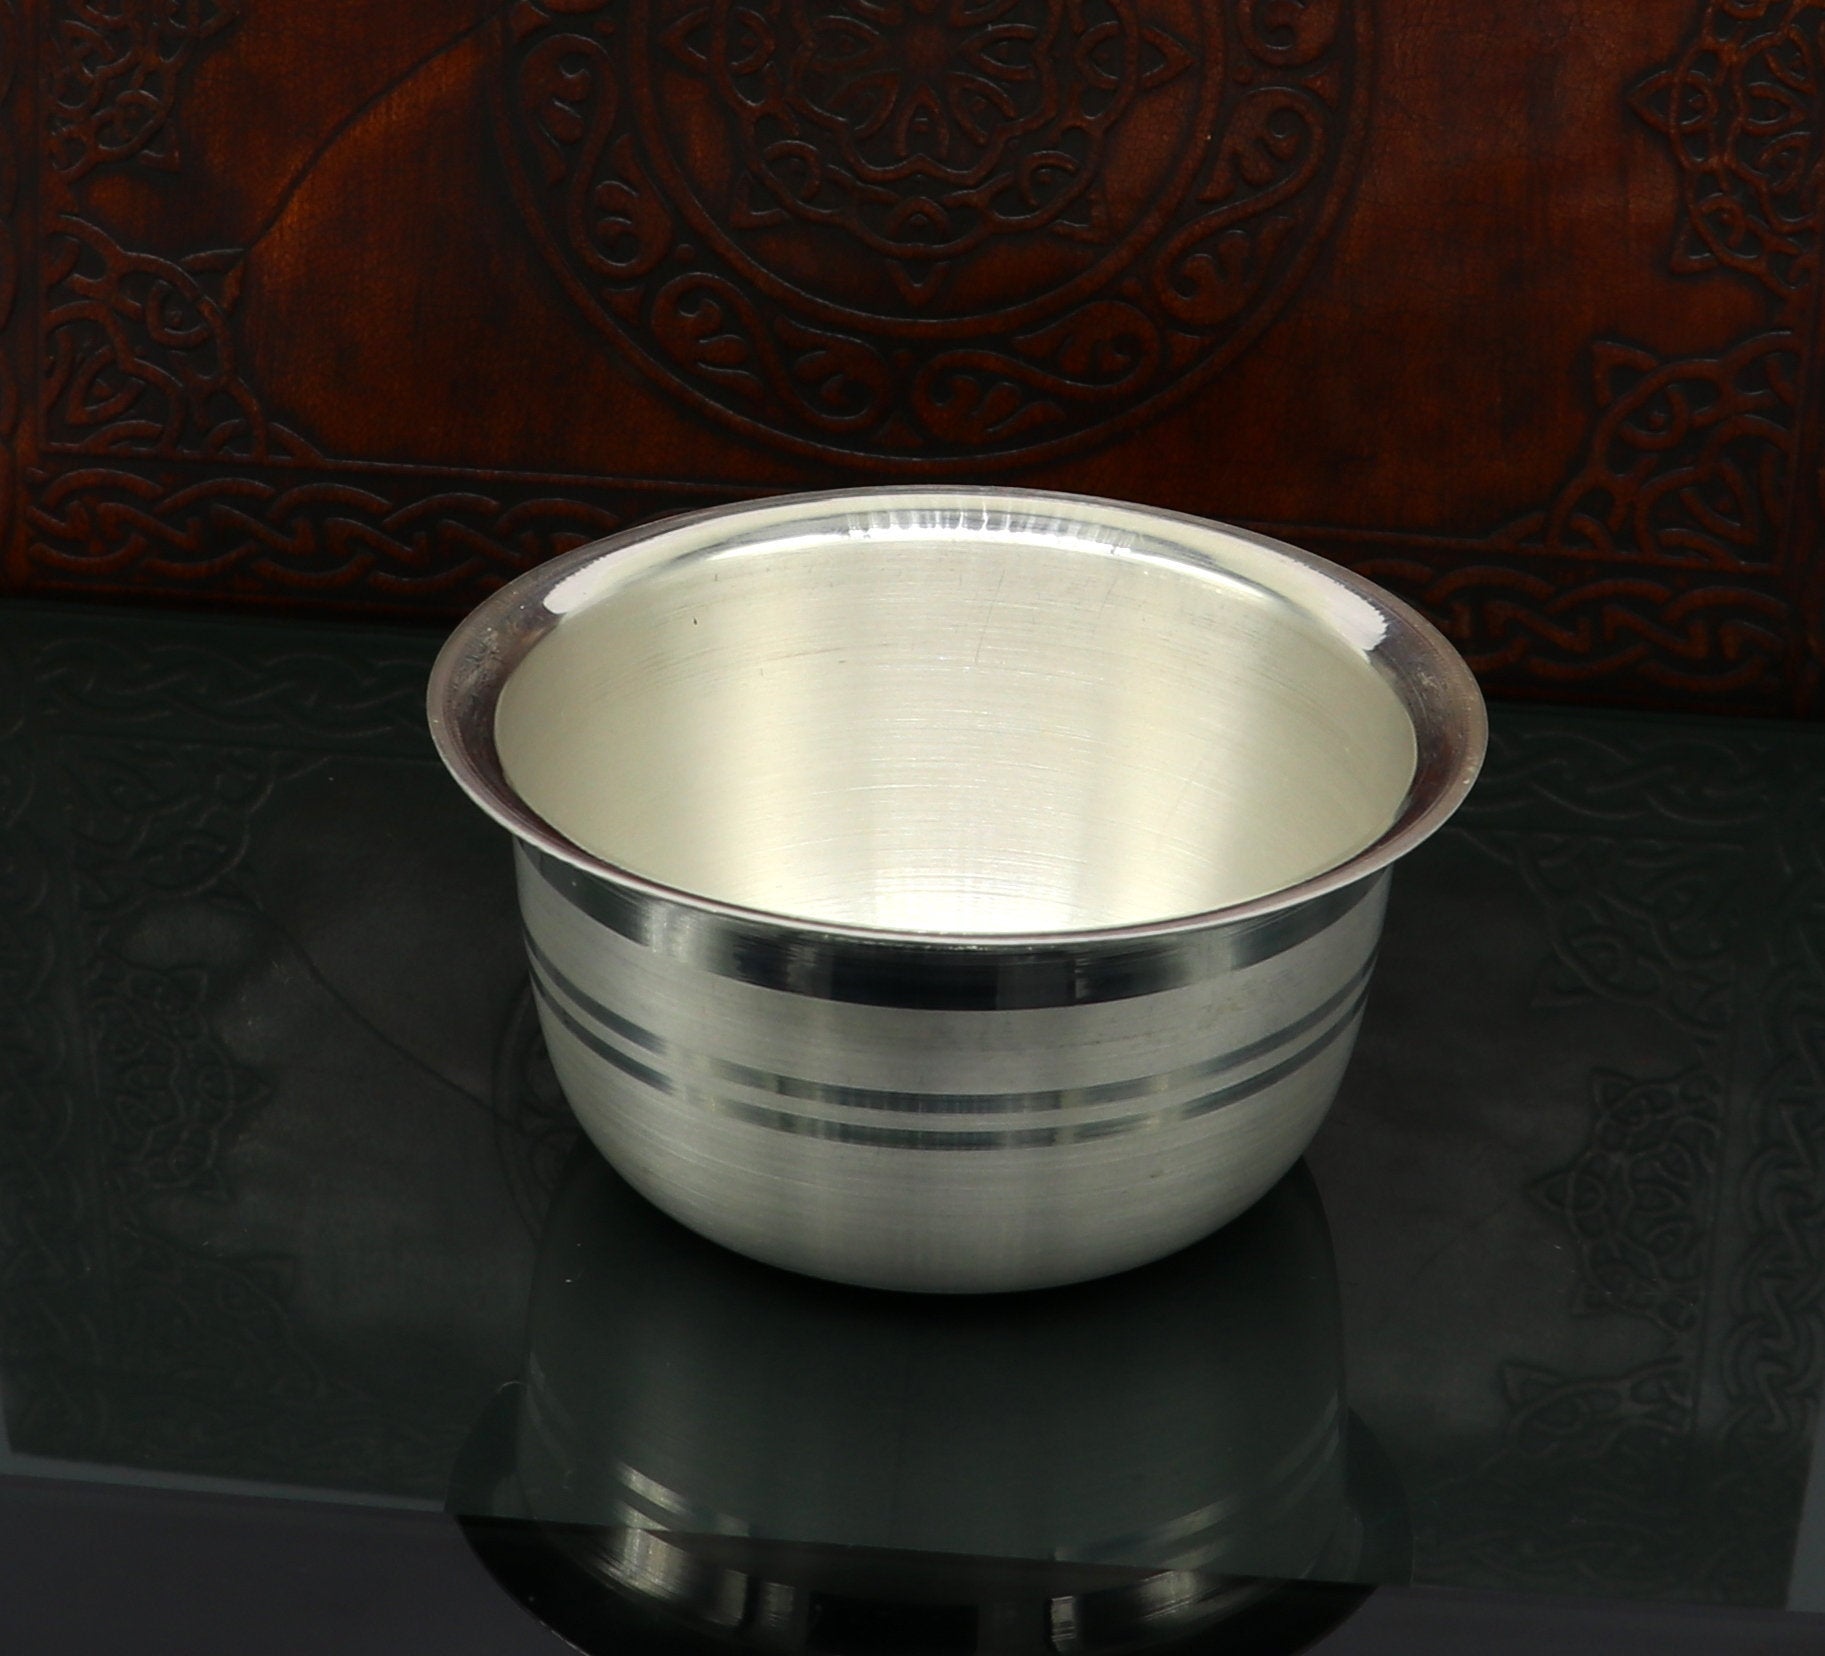 999 fine silver handmade small baby bowl , silver tumbler, flask, stay baby/kids healthy, silver vessels utensils best for baby set sv101 - TRIBAL ORNAMENTS